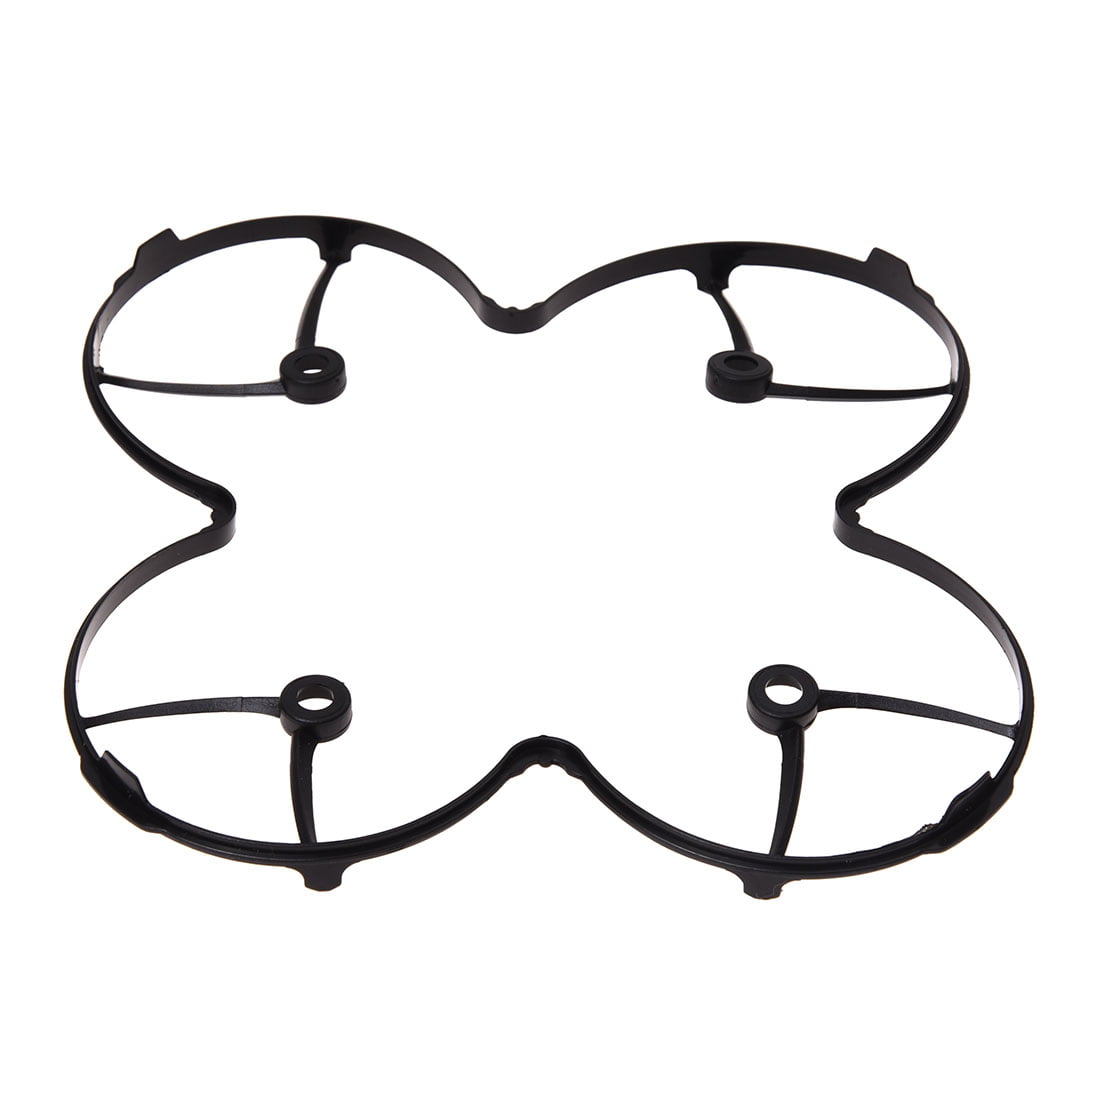 Quadcopter Propeller Blades Protection Guard Cover For Hubsan X4 H107/H107L Y ZC 